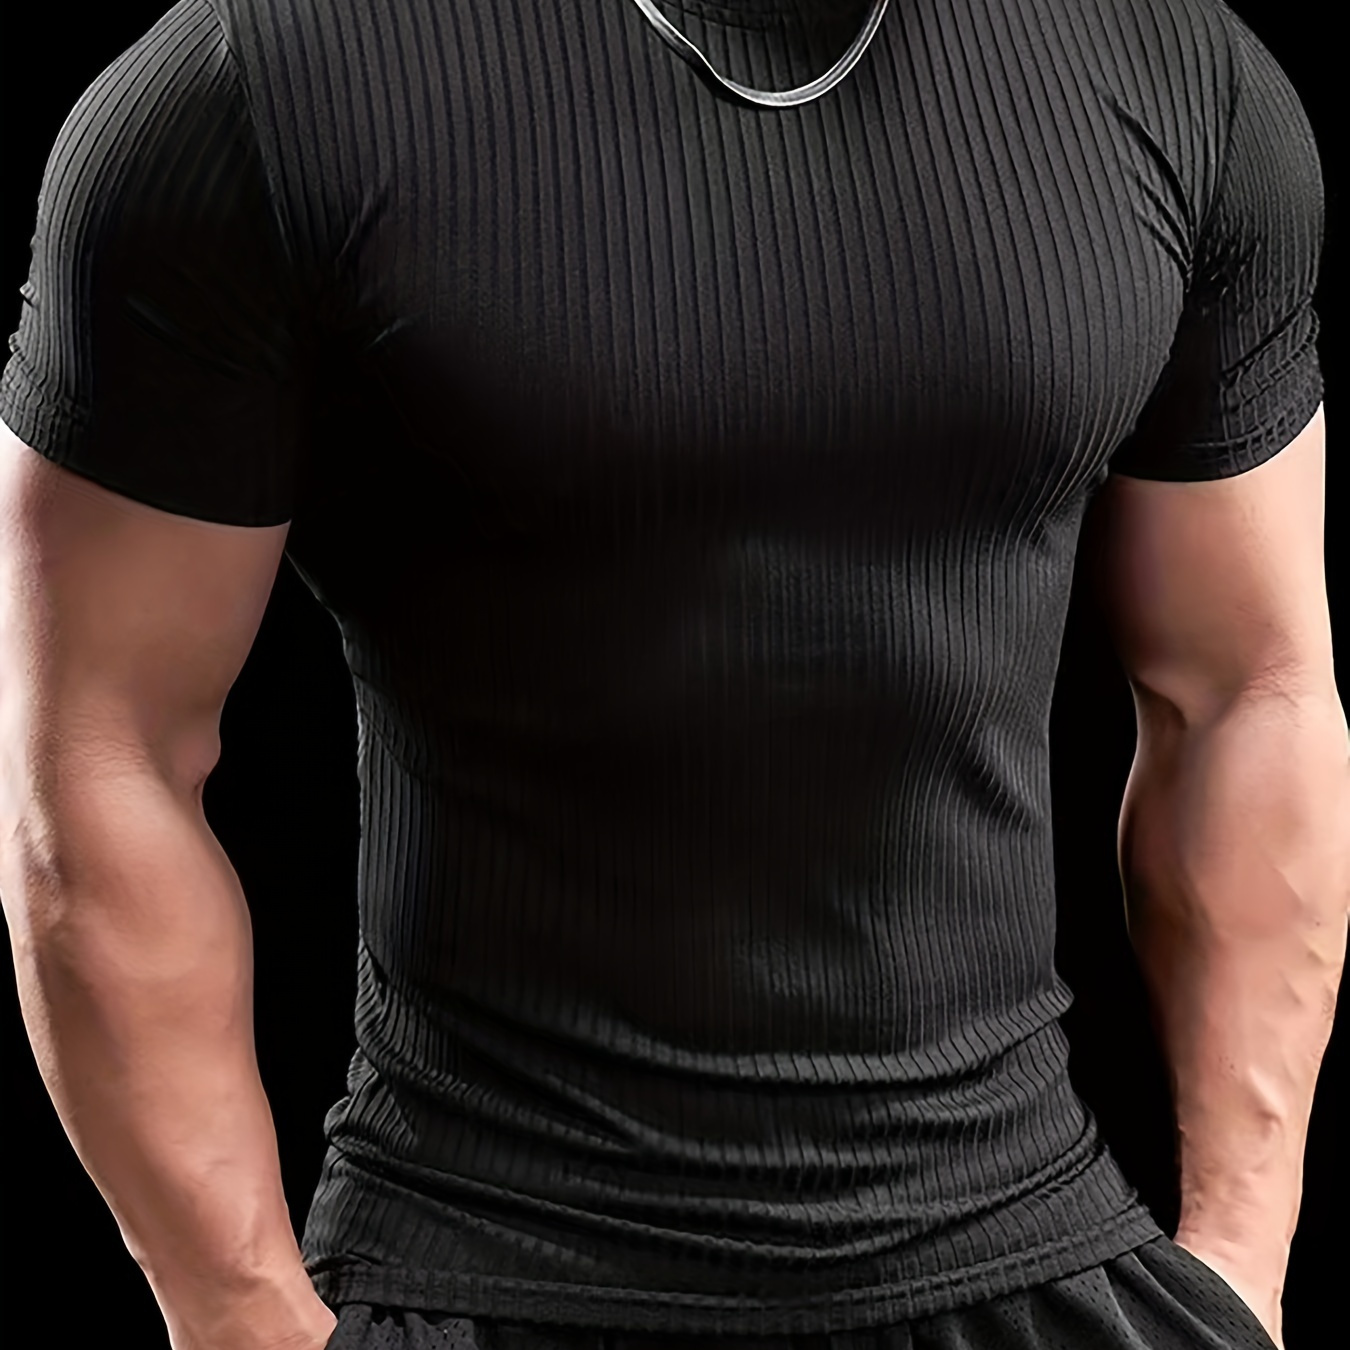 

Solid Color Stripe Pattern Men's Short Sleeve Crew Neck T-shirt, Casual And Chic Sports Tops For Men, Versatile For Summer Fitness Workout And Gym Wear